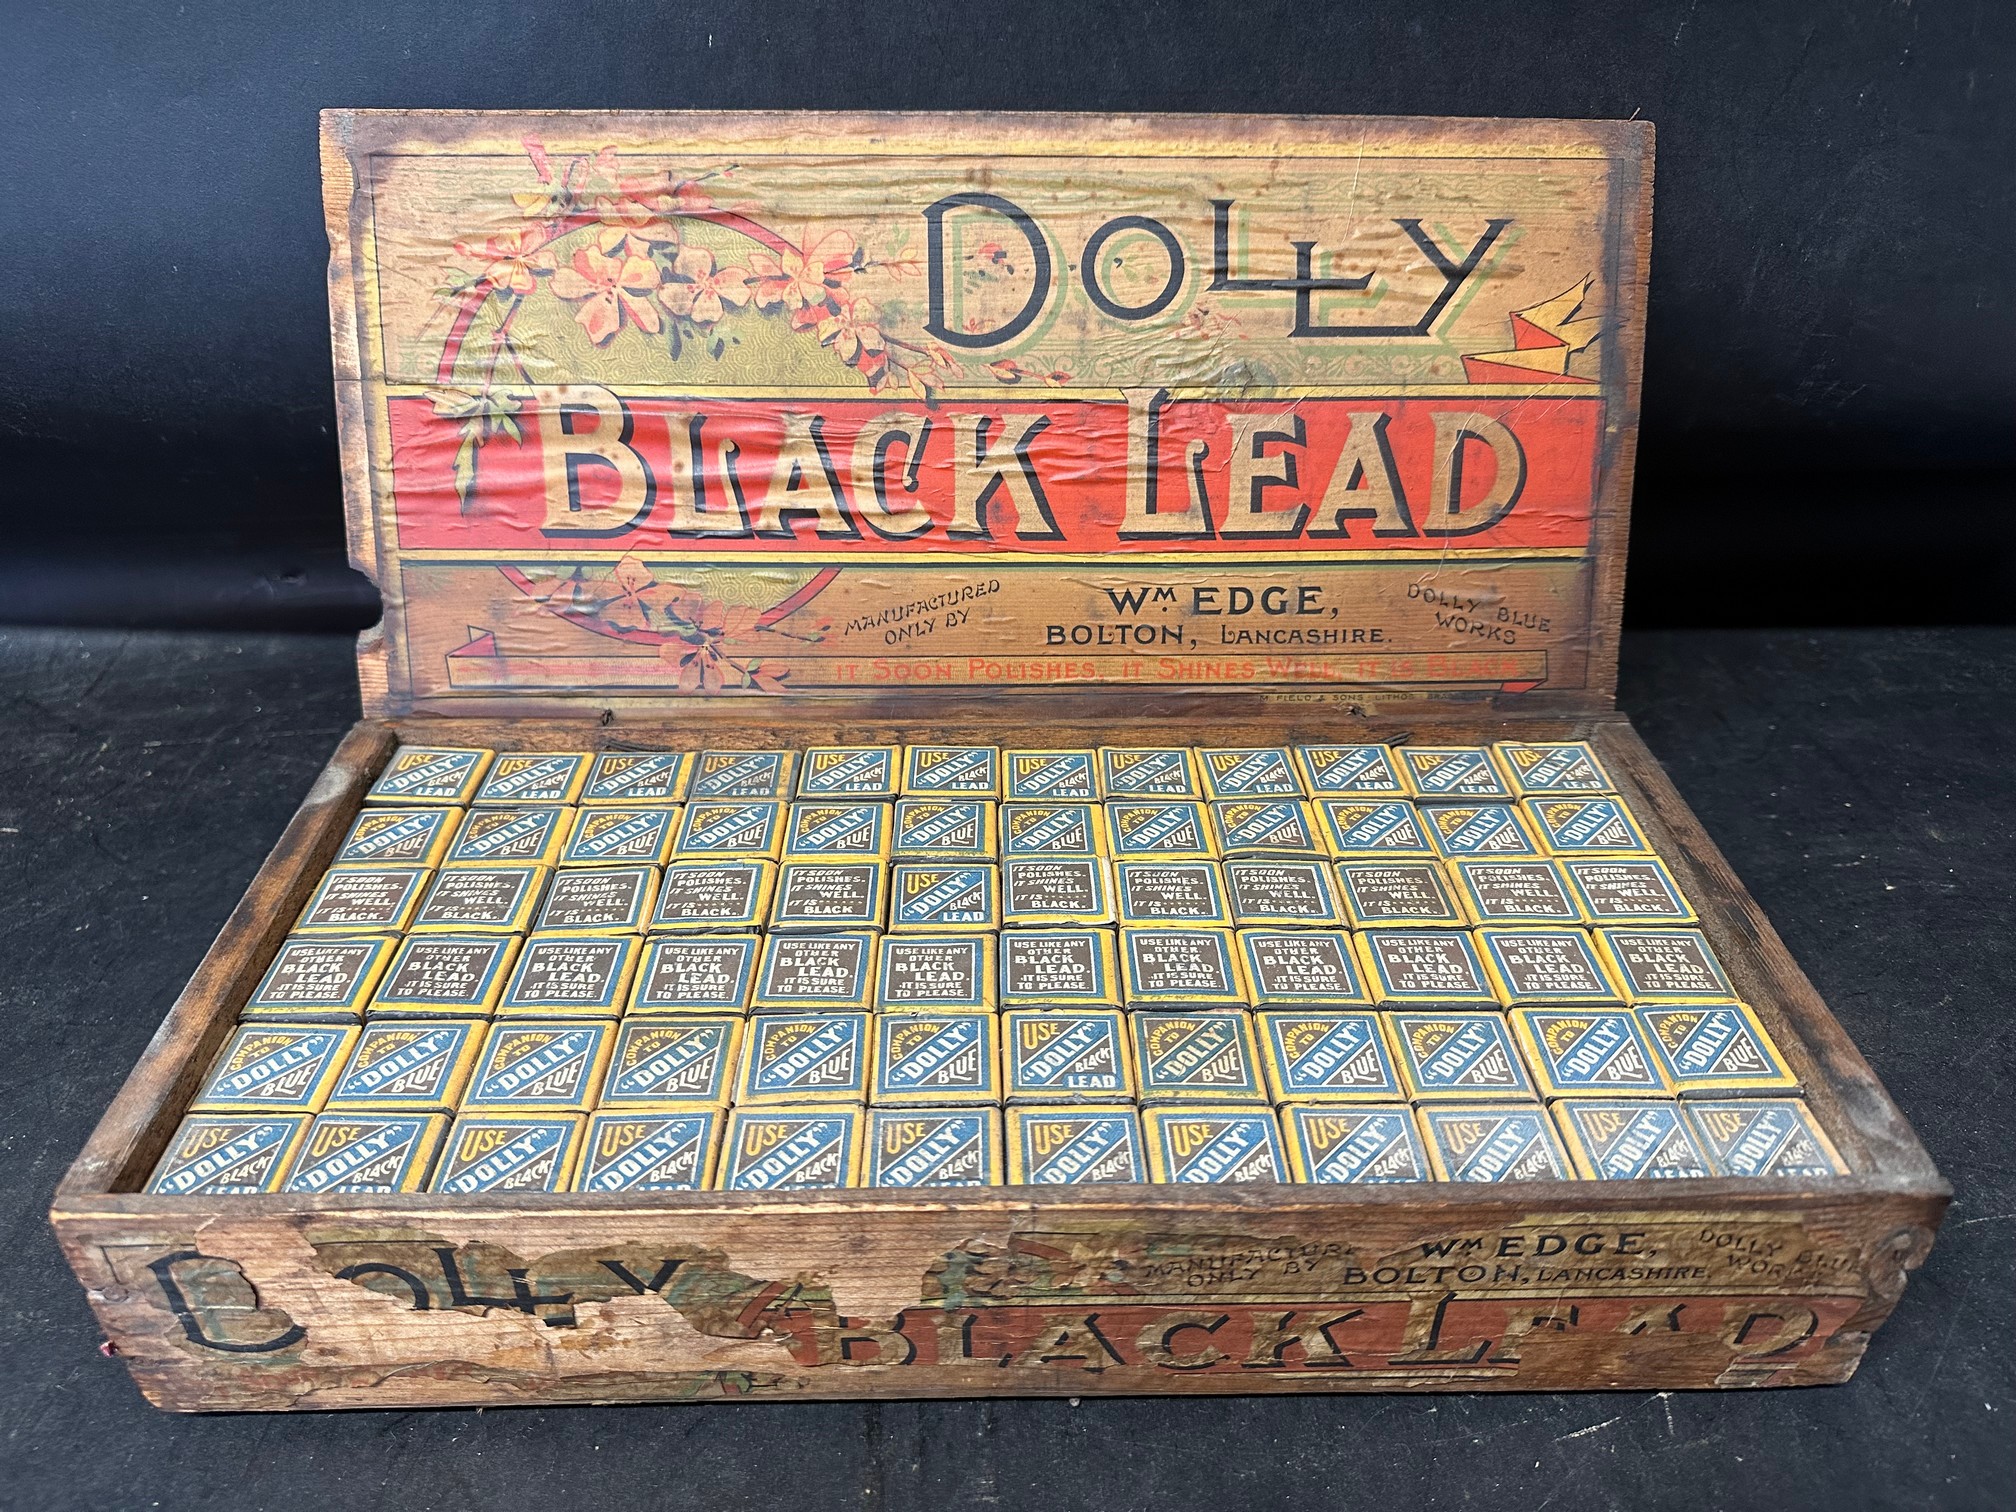 A Dolly Black Lead polish wooden counter top dispensing crate with full contents, manufactured by